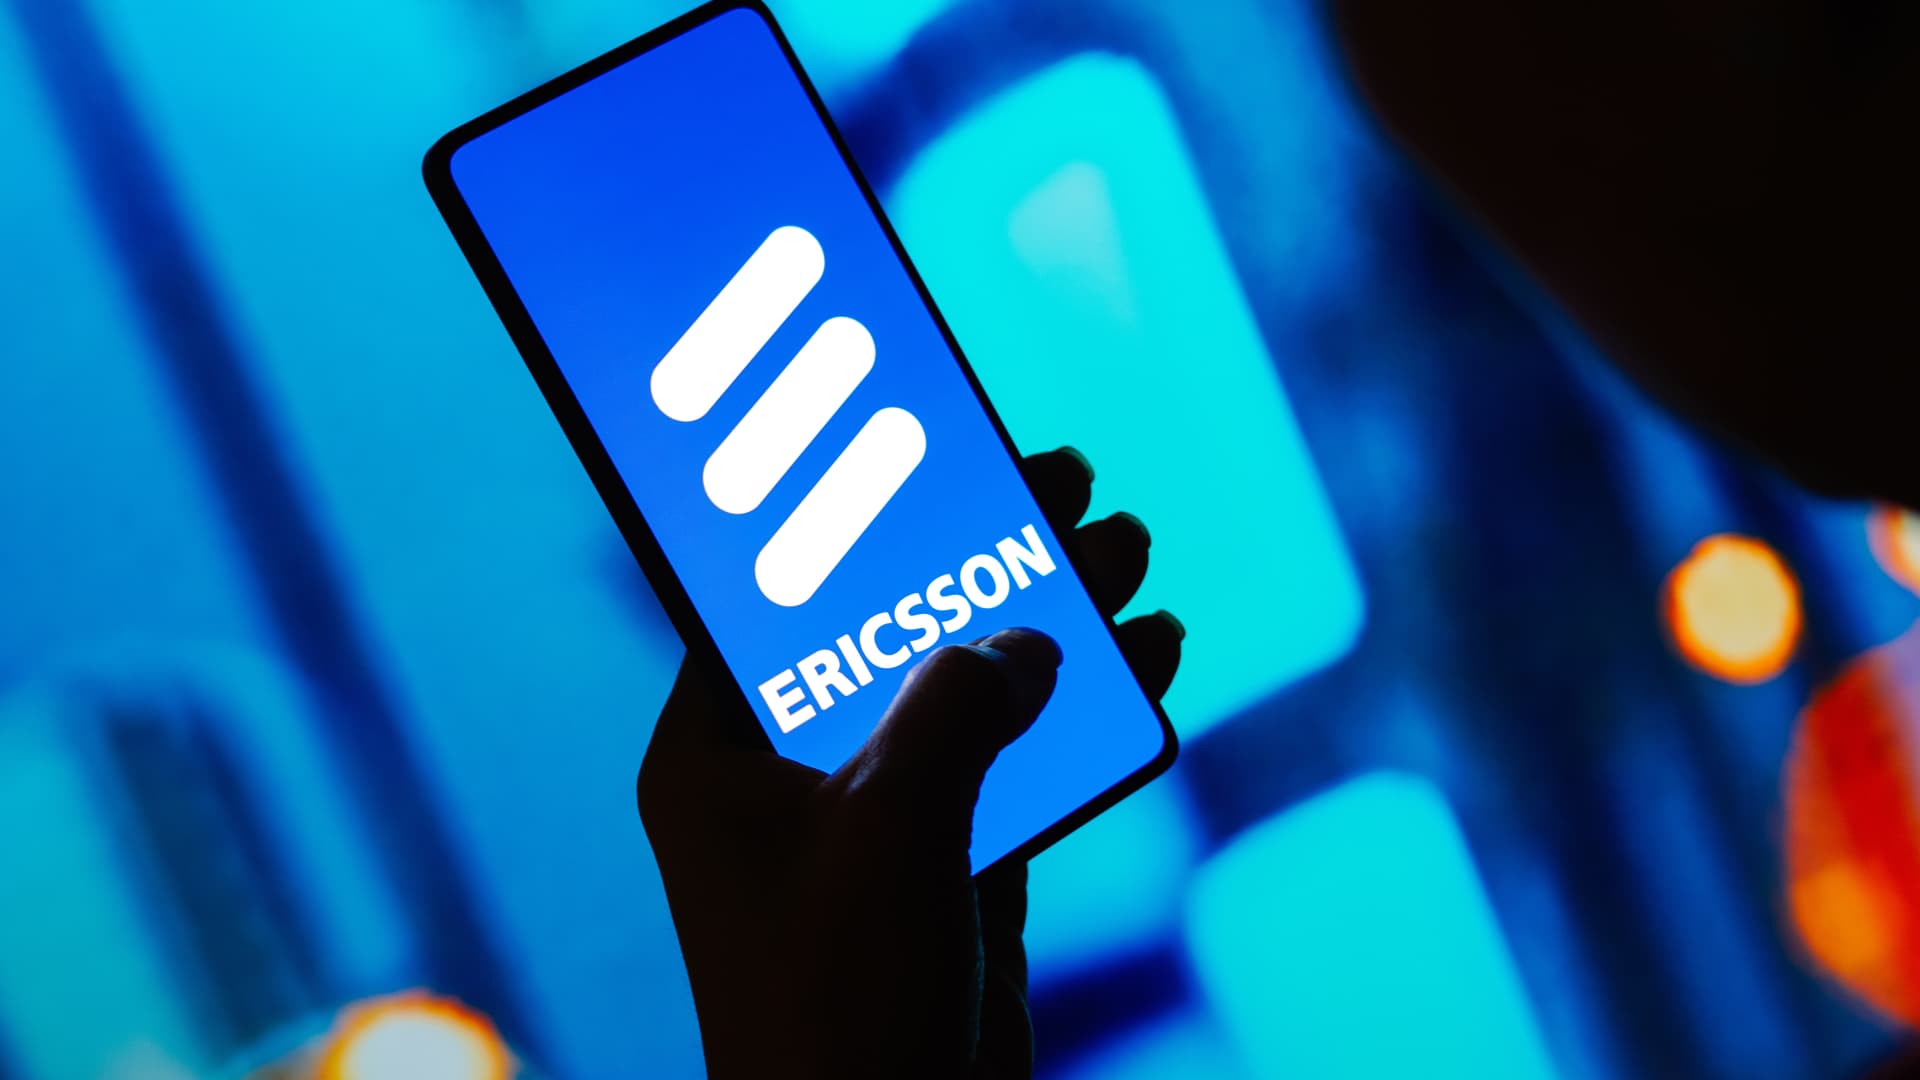 Ericsson's Q1 profit grows unexpectedly, eyes stabilisation of sales in H2 - CNBC